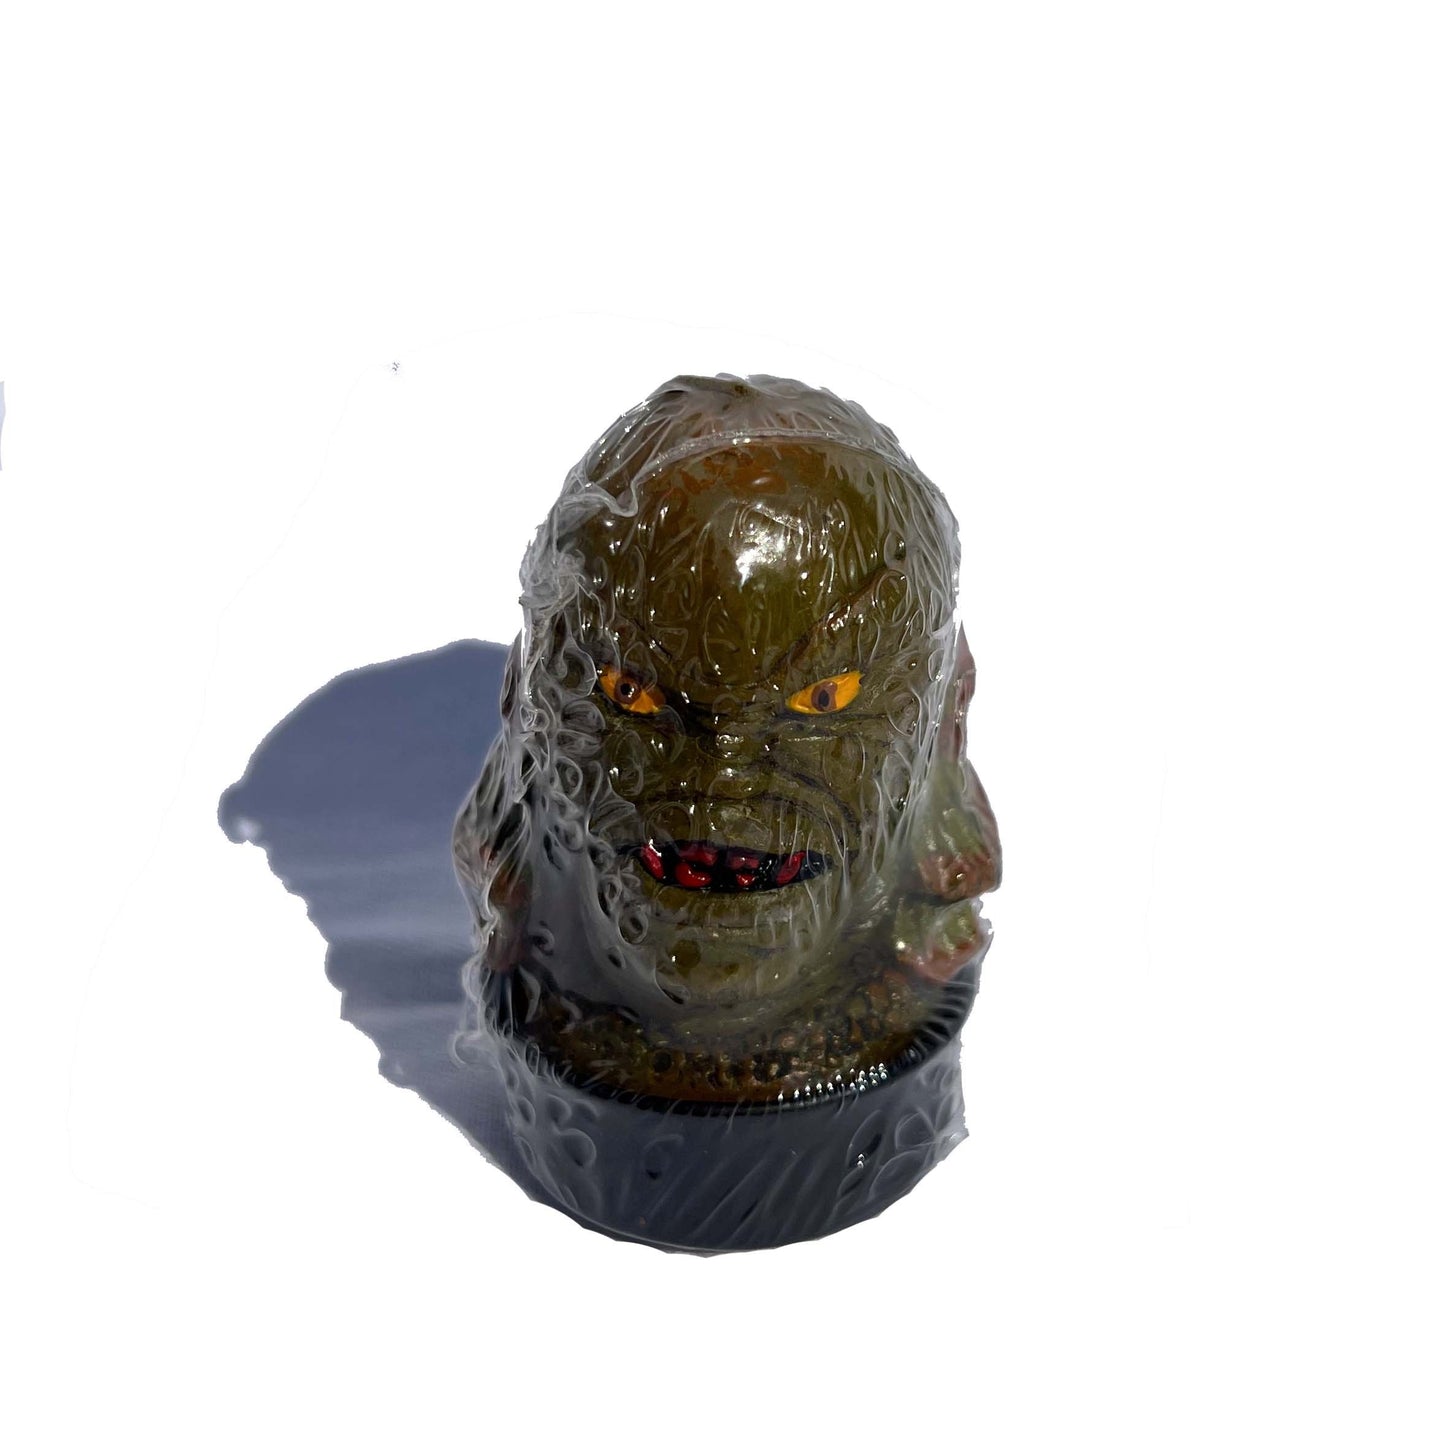 Universal Monsters Creature from the Black Lagoon Tea Candle 1990